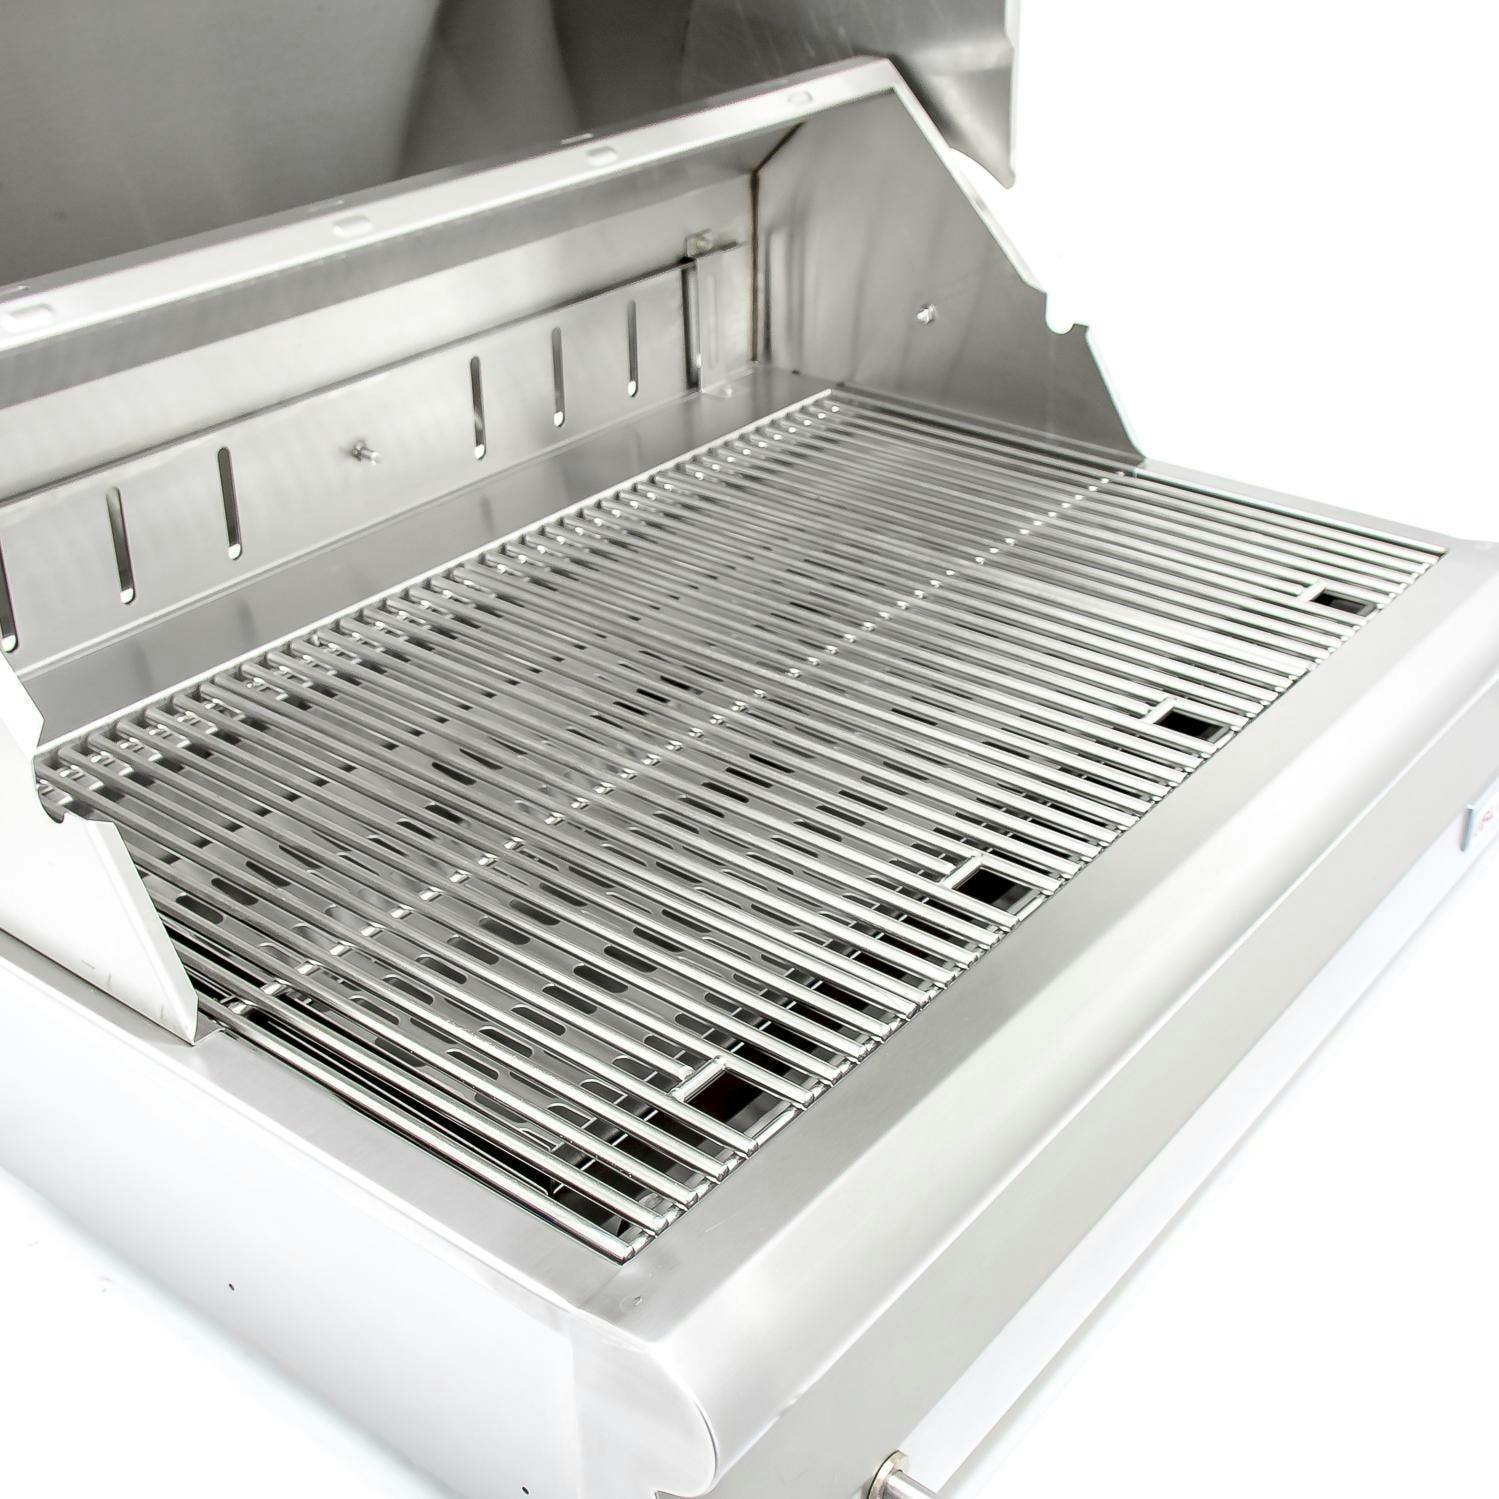 Blaze Stainless Steel Charcoal Grill With Adjustable Charcoal Tray